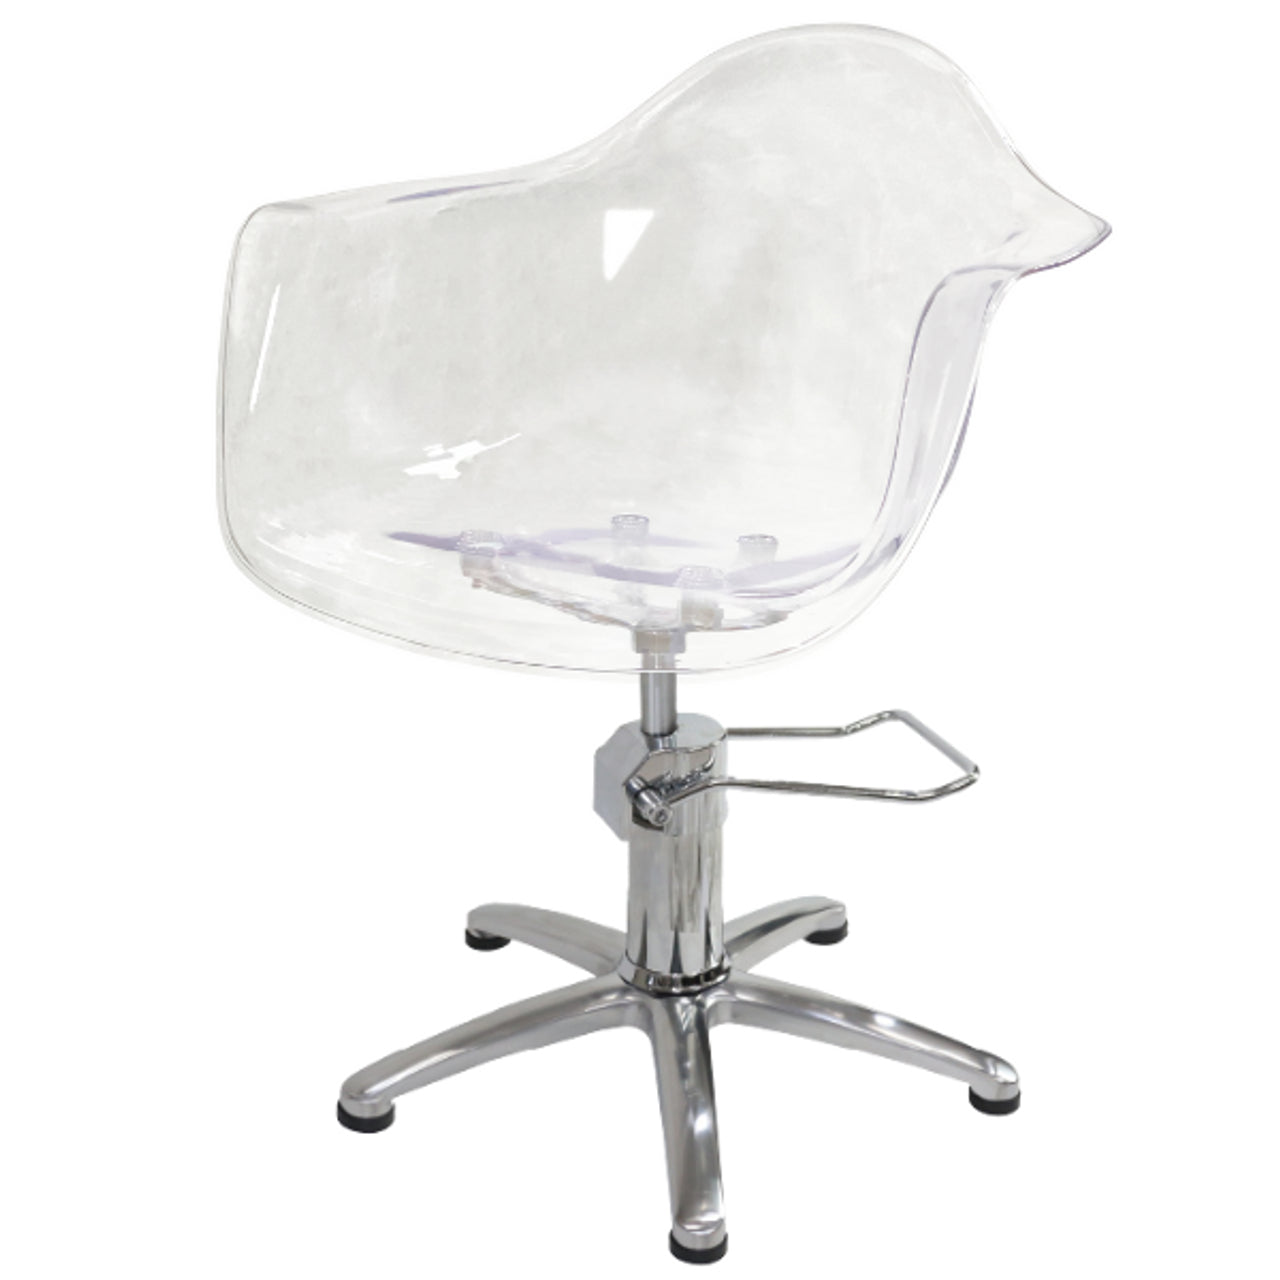 Joiken Erica Clear Hydraulic Styling Chair